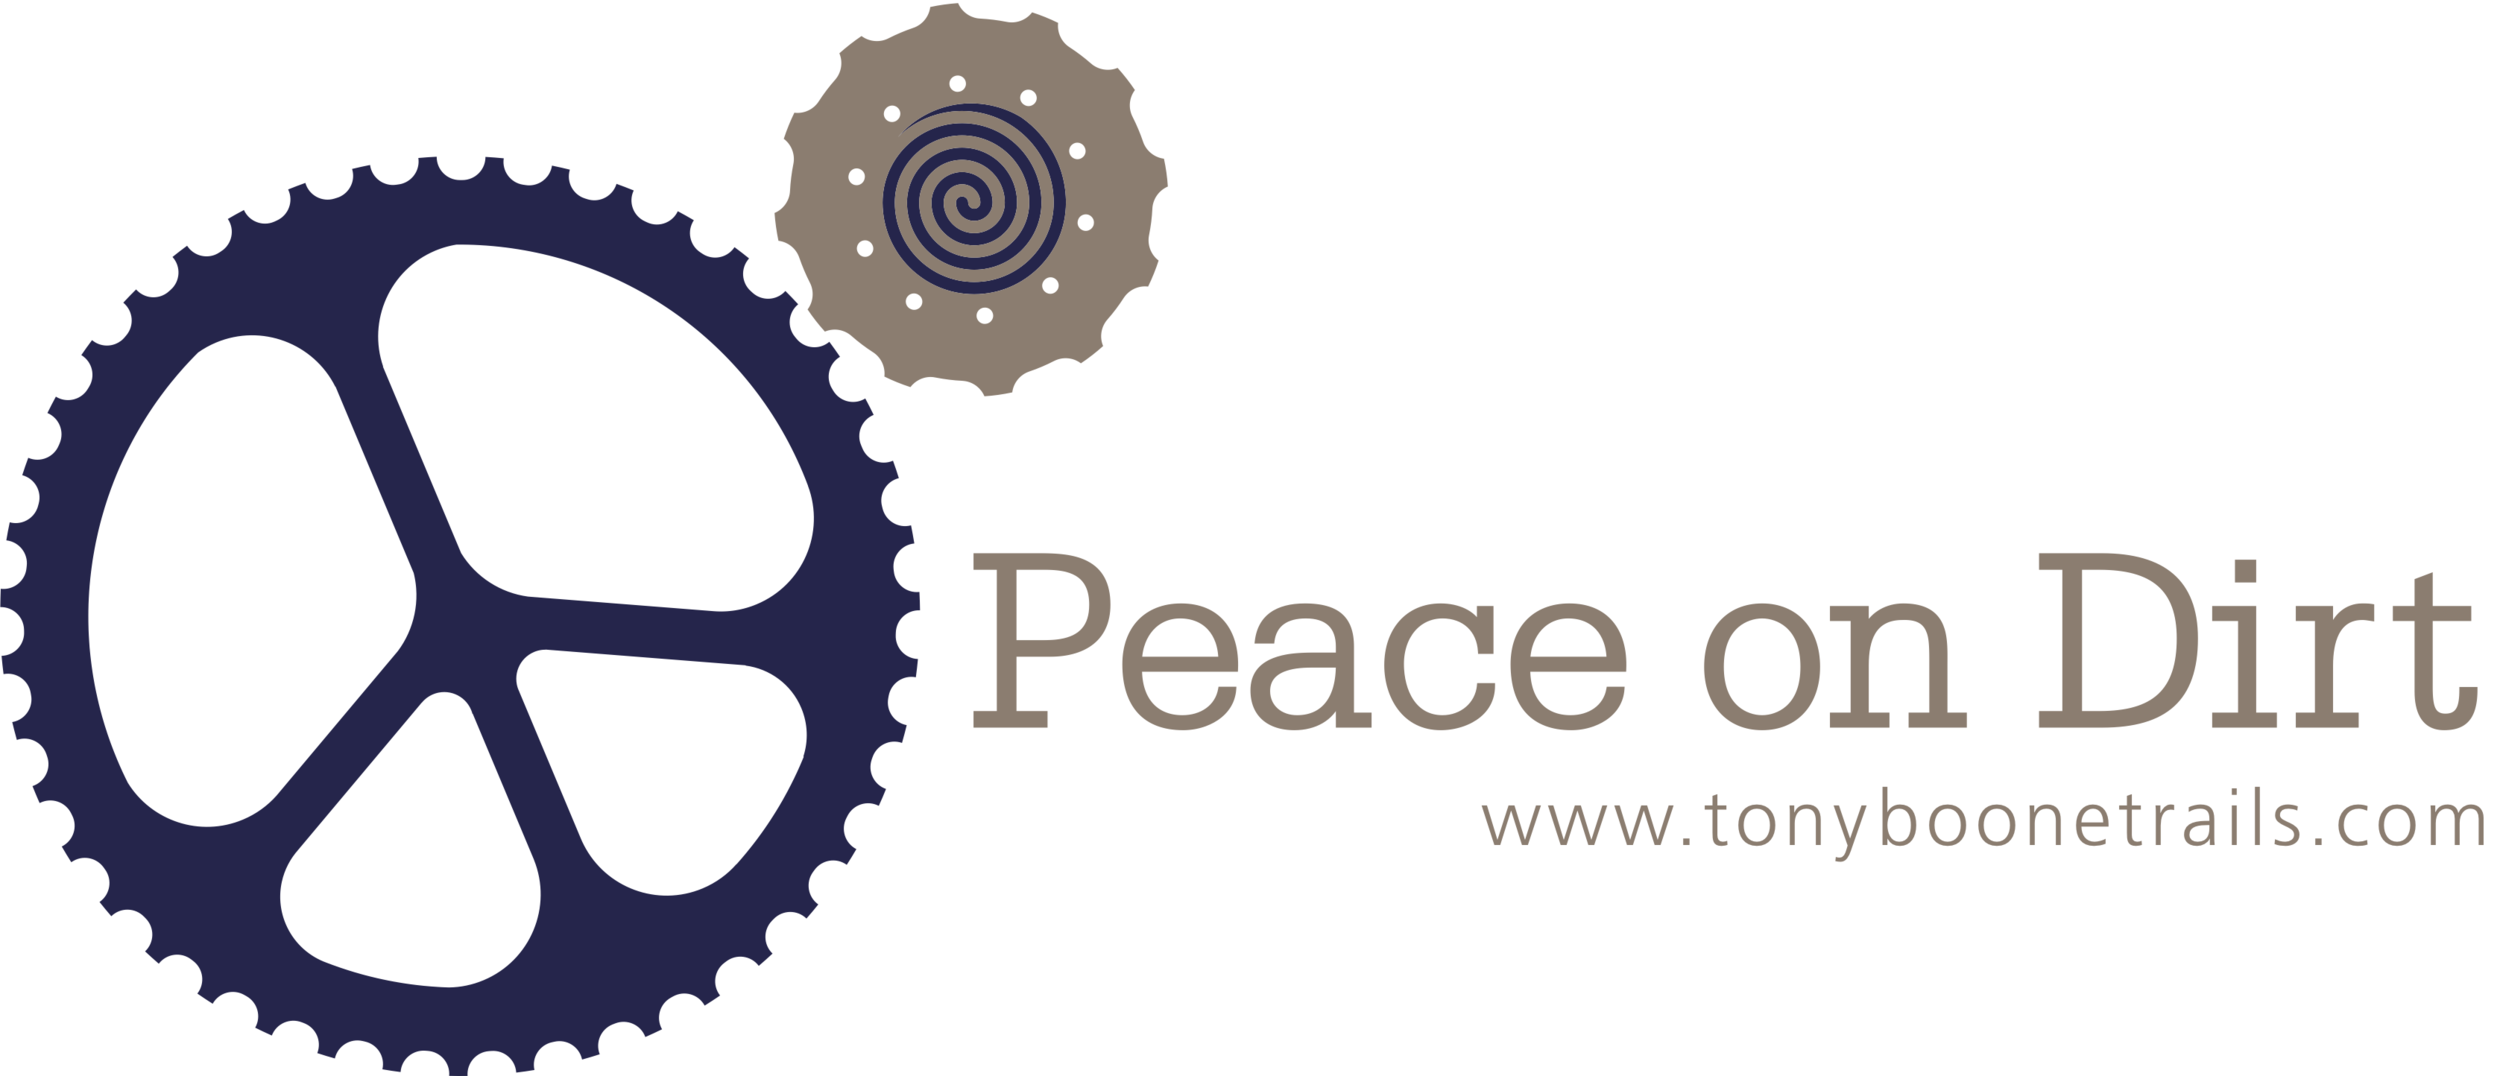 Peace on dirt TB cmyk white background.png